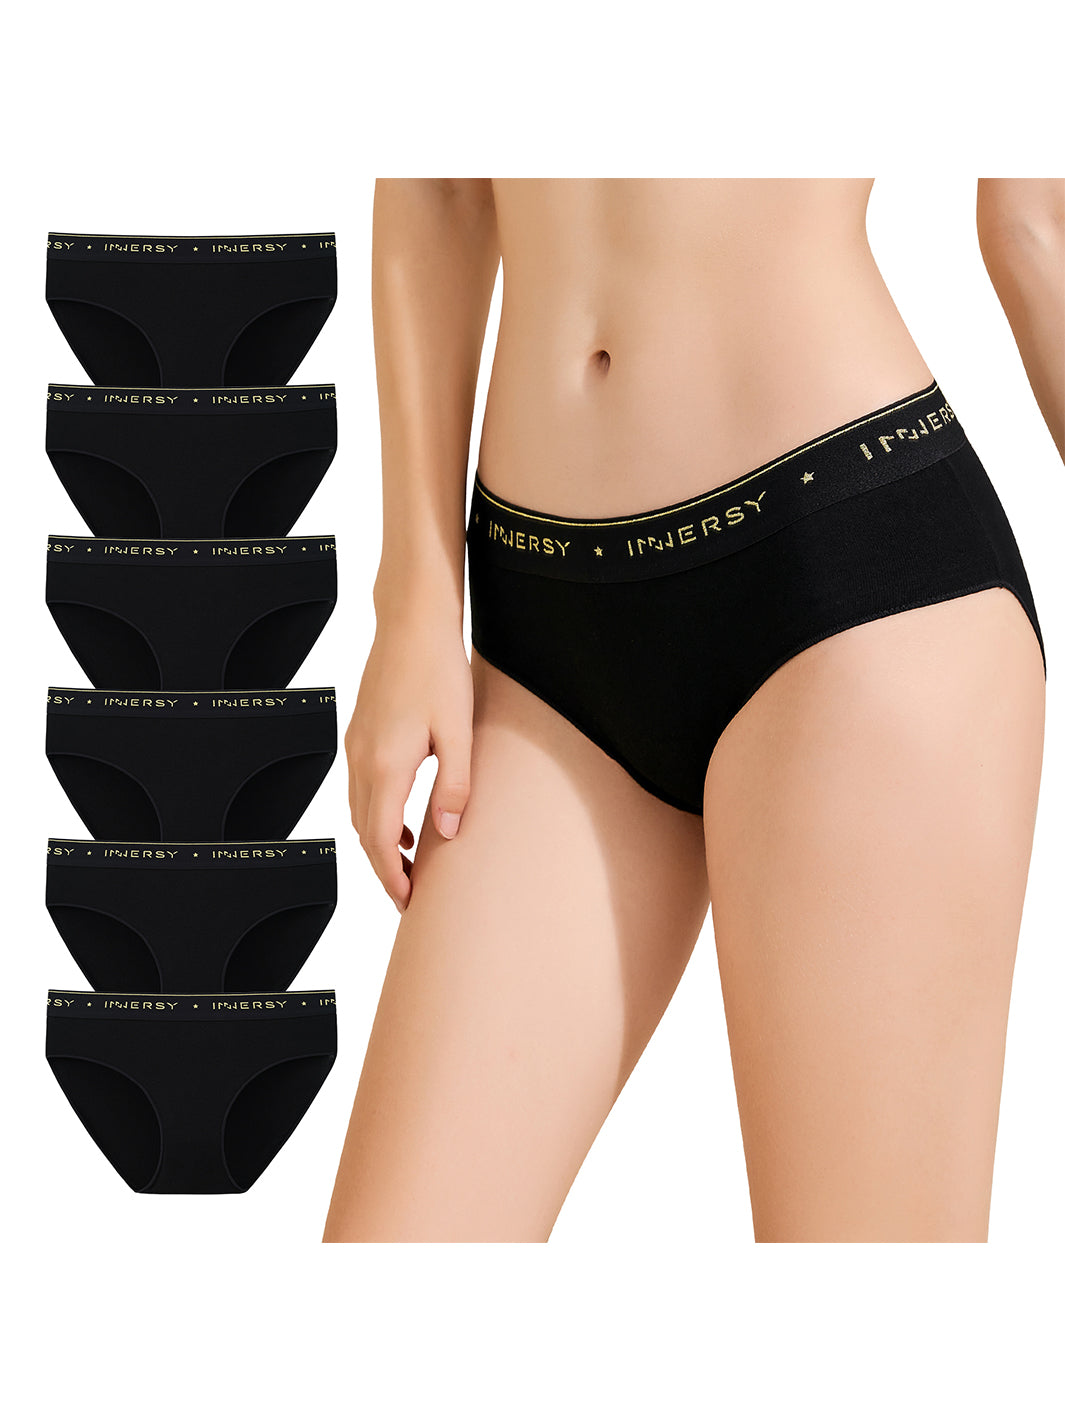  INNERSY Womens Underwear Cotton Hipster Panties